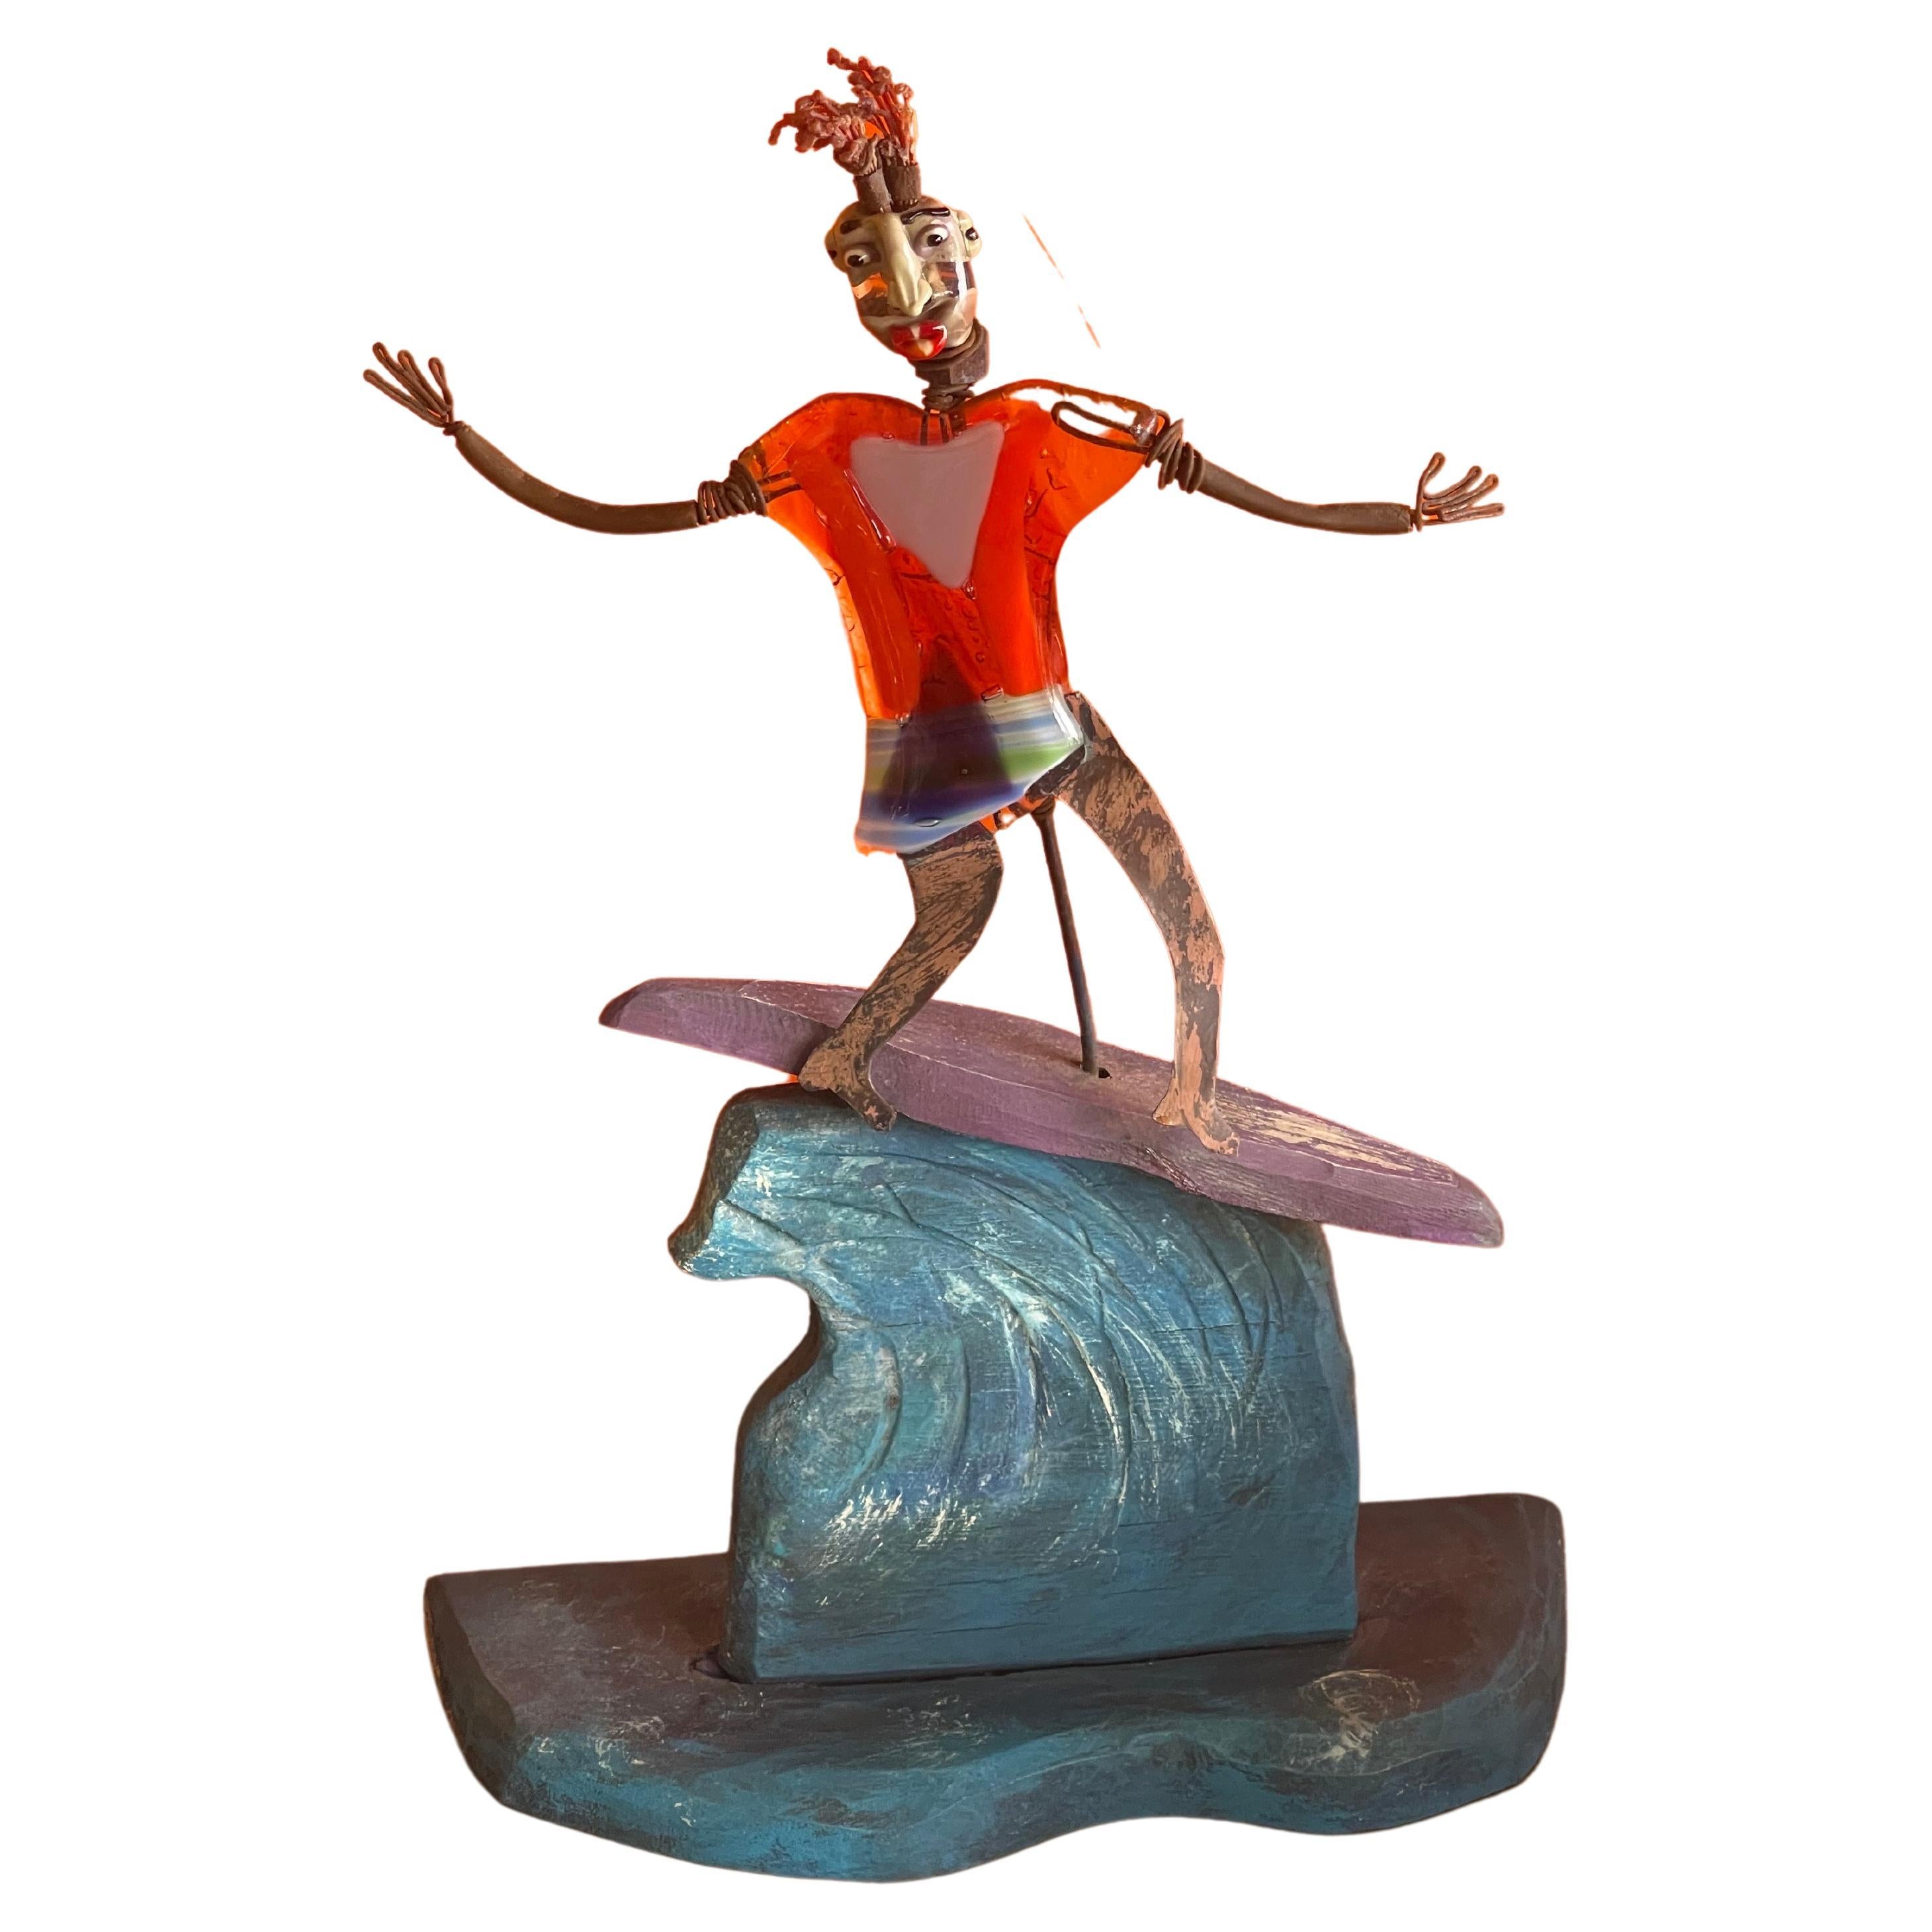 Whimsical Surfer Sculpture by Mitch Berg